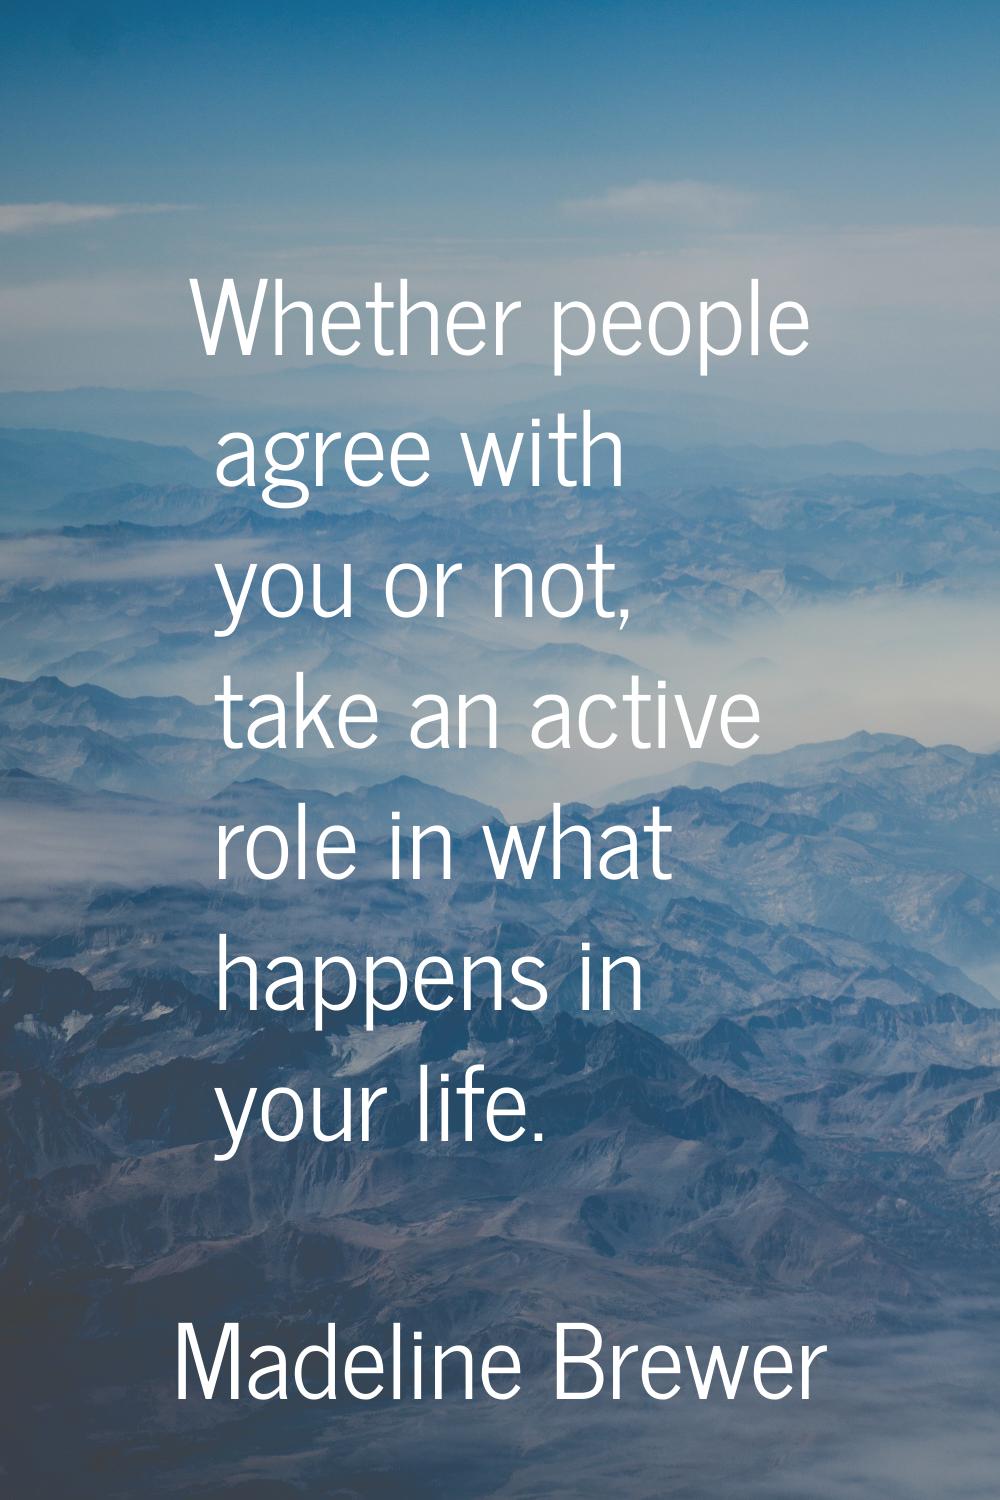 Whether people agree with you or not, take an active role in what happens in your life.